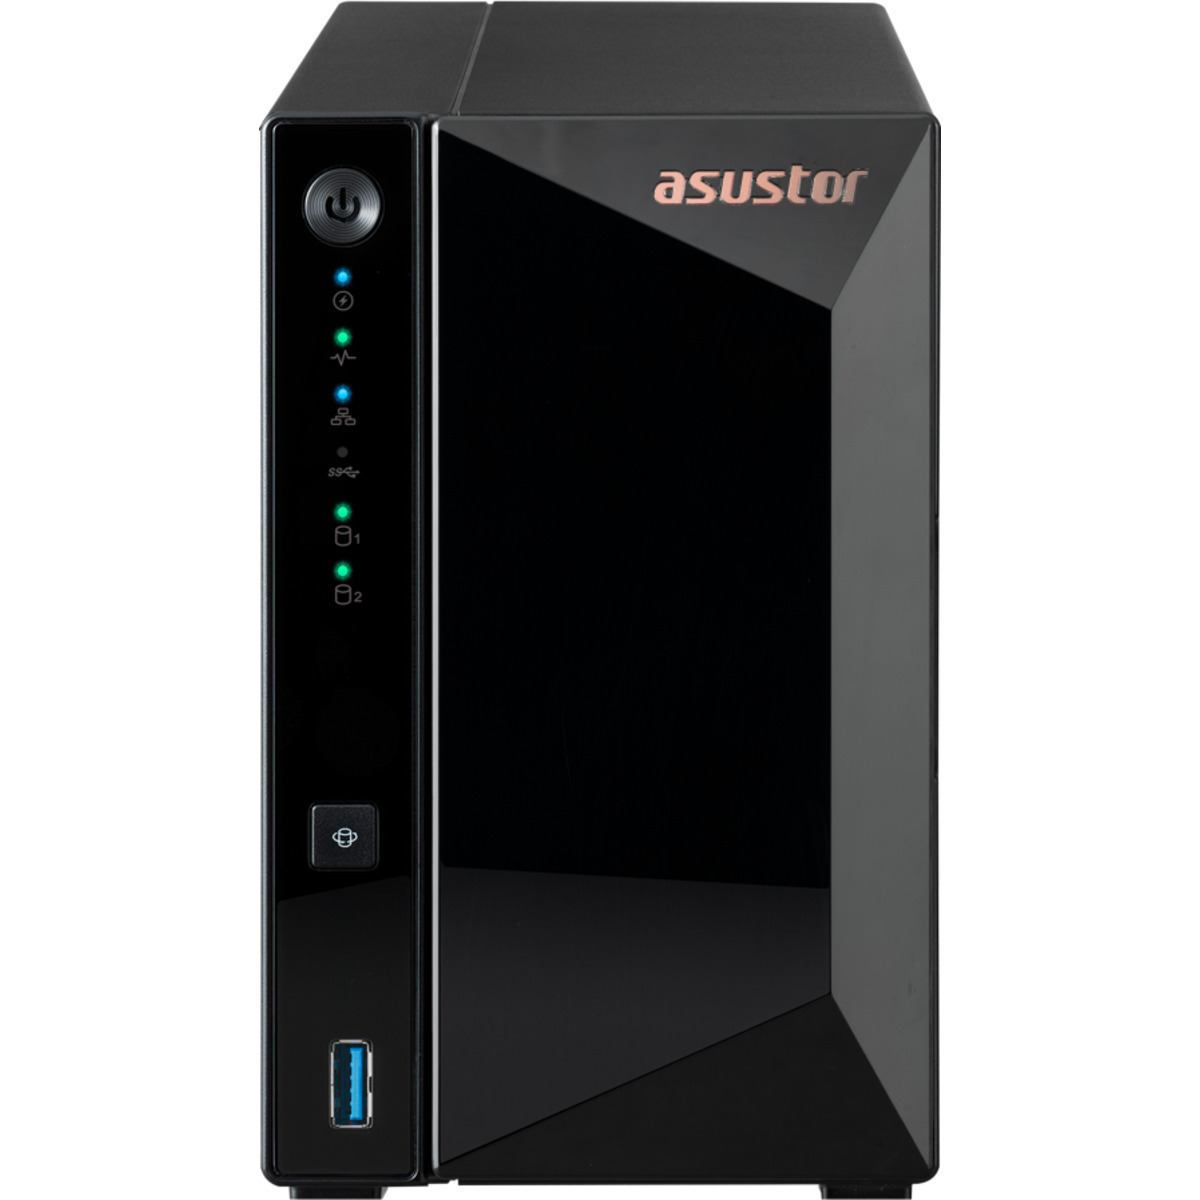 ASUSTOR DRIVESTOR 2 Pro Gen2 AS3302T v2 8tb 2-Bay Desktop Personal / Basic Home / Small Office NAS - Network Attached Storage Device 2x4tb Western Digital Blue WD40EZRZ 3.5 5400rpm SATA 6Gb/s HDD CONSUMER Class Drives Installed - Burn-In Tested - ON SALE DRIVESTOR 2 Pro Gen2 AS3302T v2